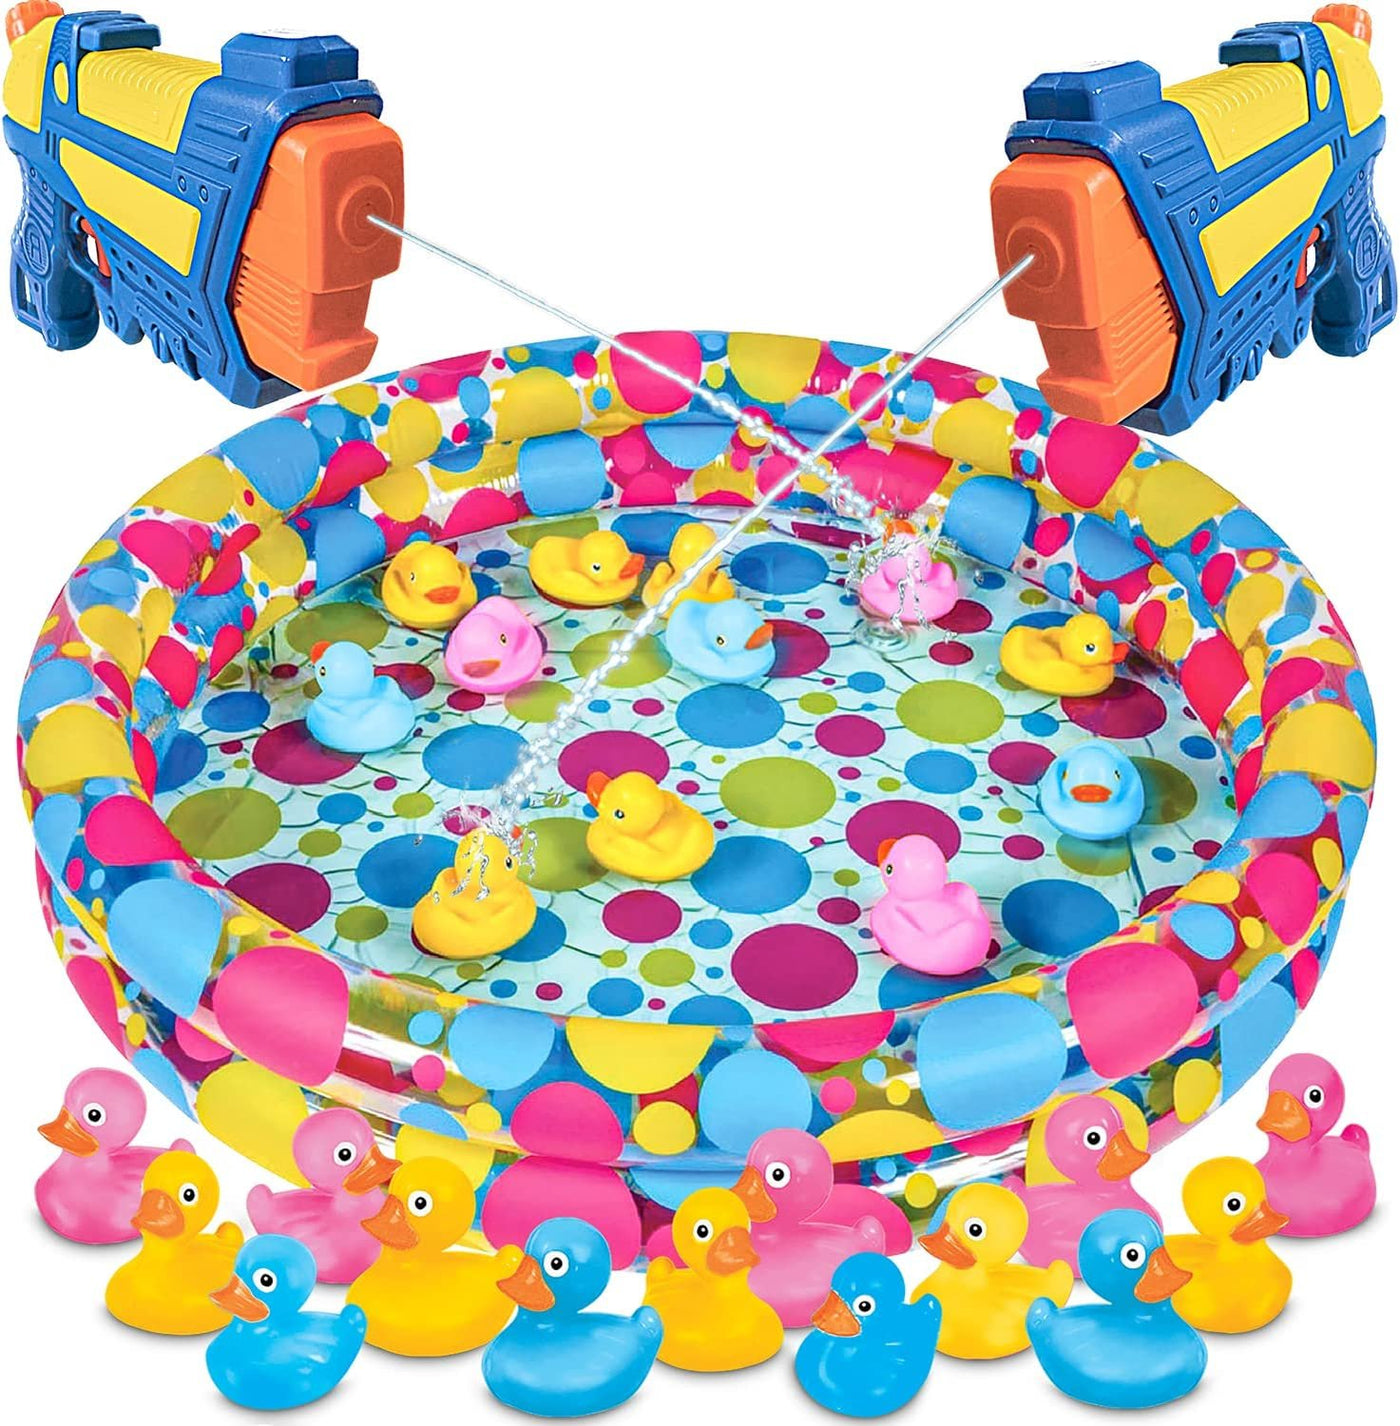 DIY Duck Pond Carnival Game: How to Make One at Home (4 Minutes